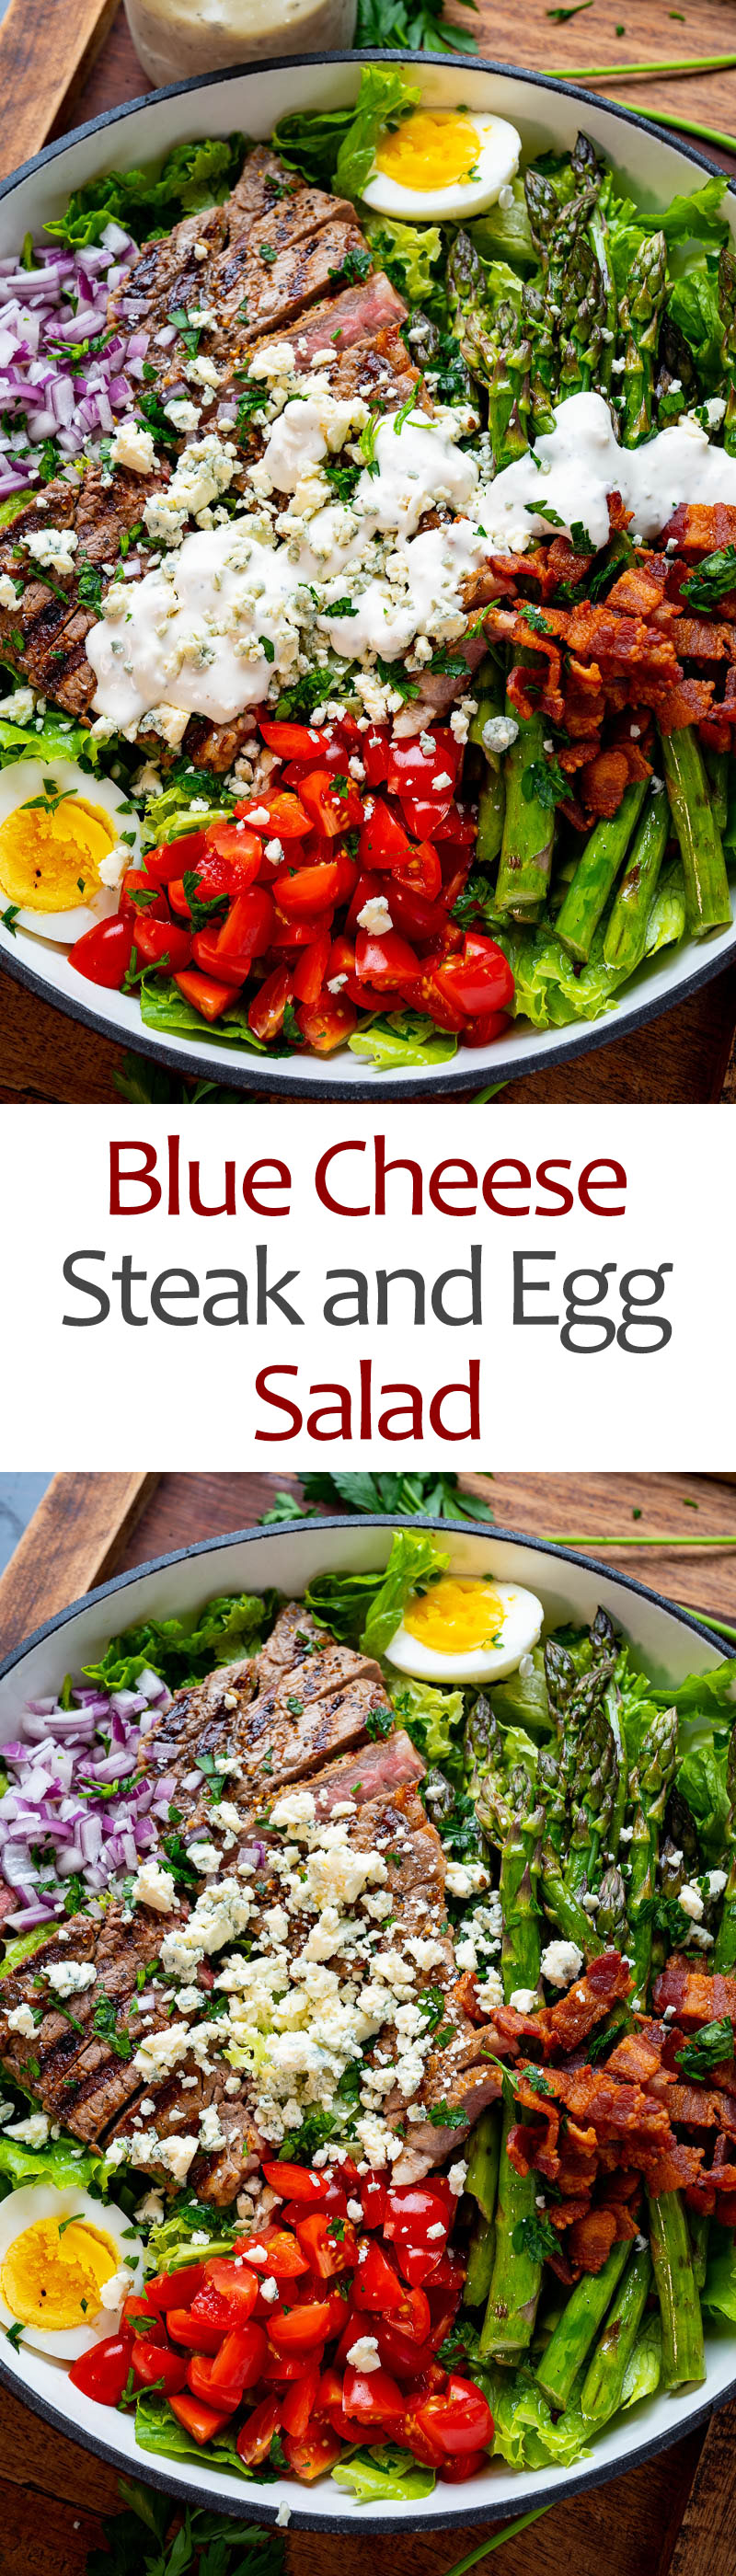 Steak and Egg Salad with Blue Cheese Dressing